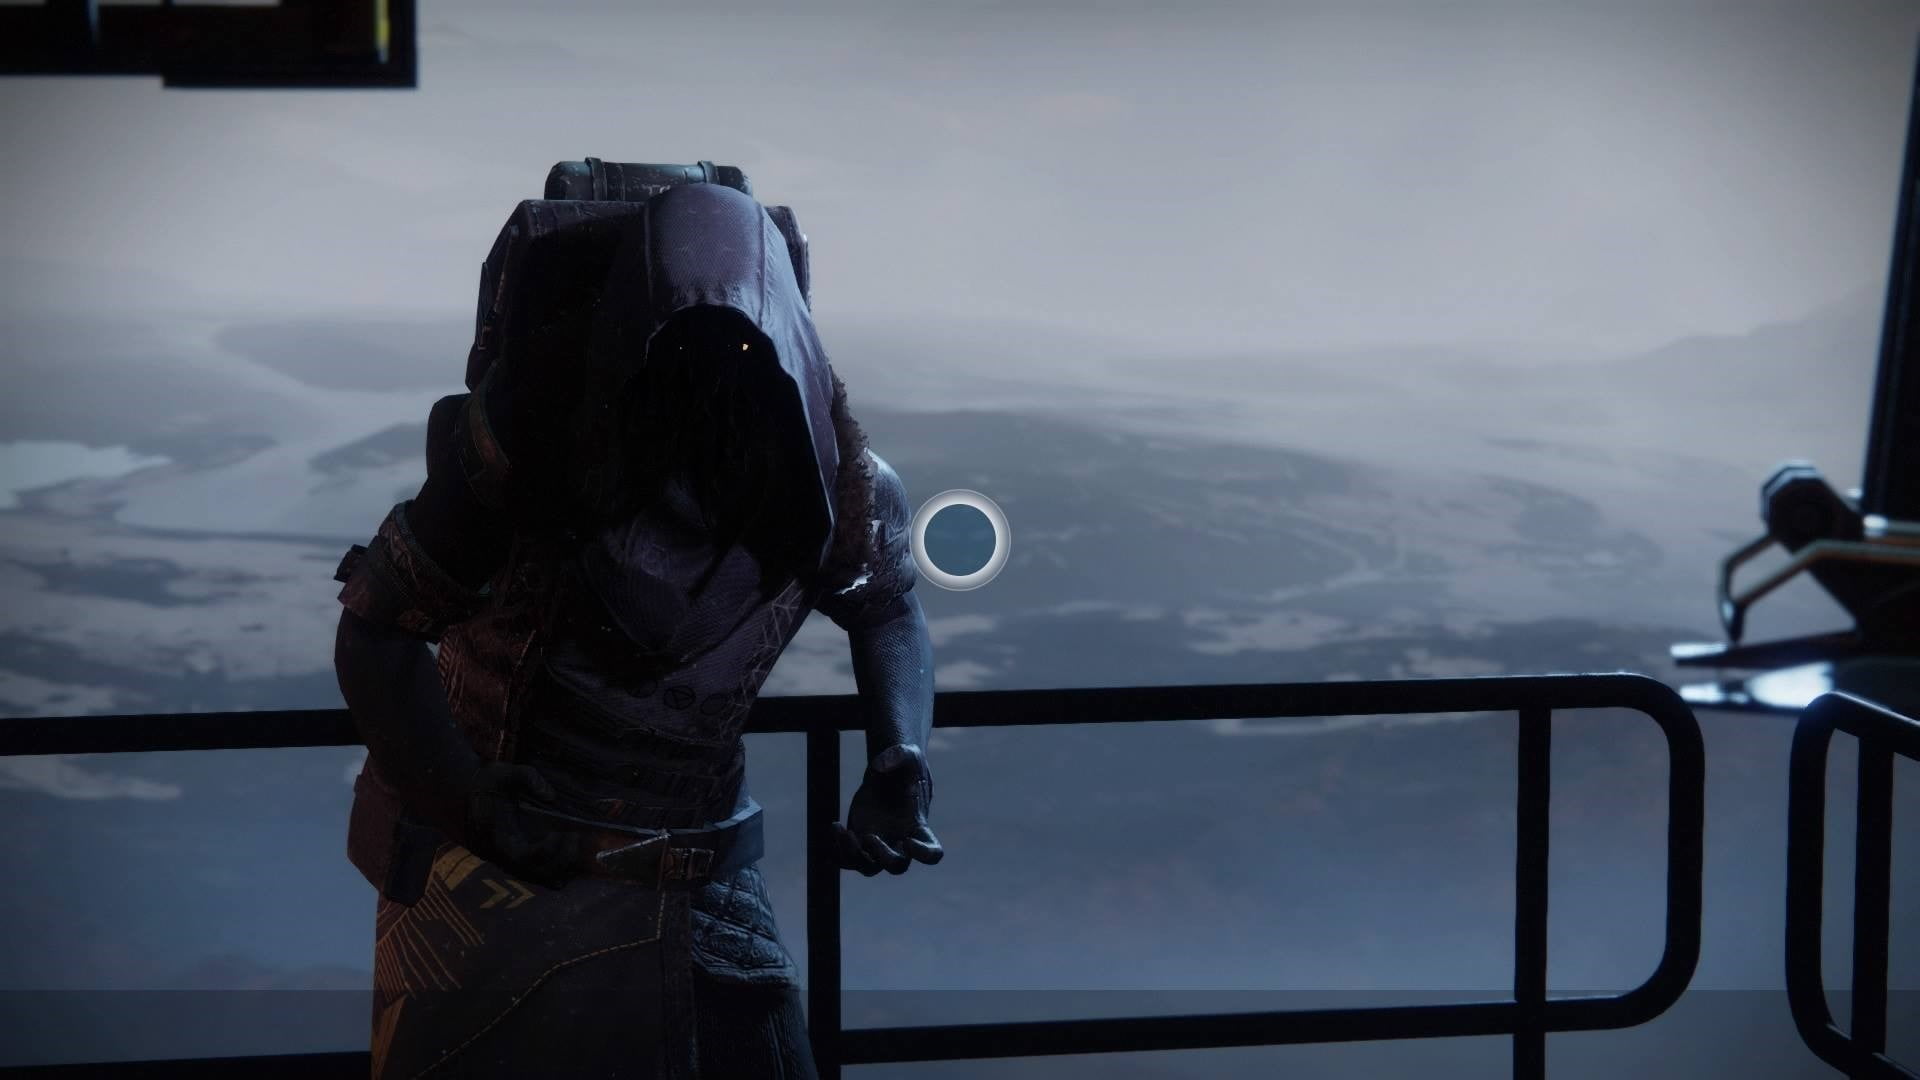 Destiny 2 Xur Inventory – Wormhusk Crown, Heart of Inmost Light, and More